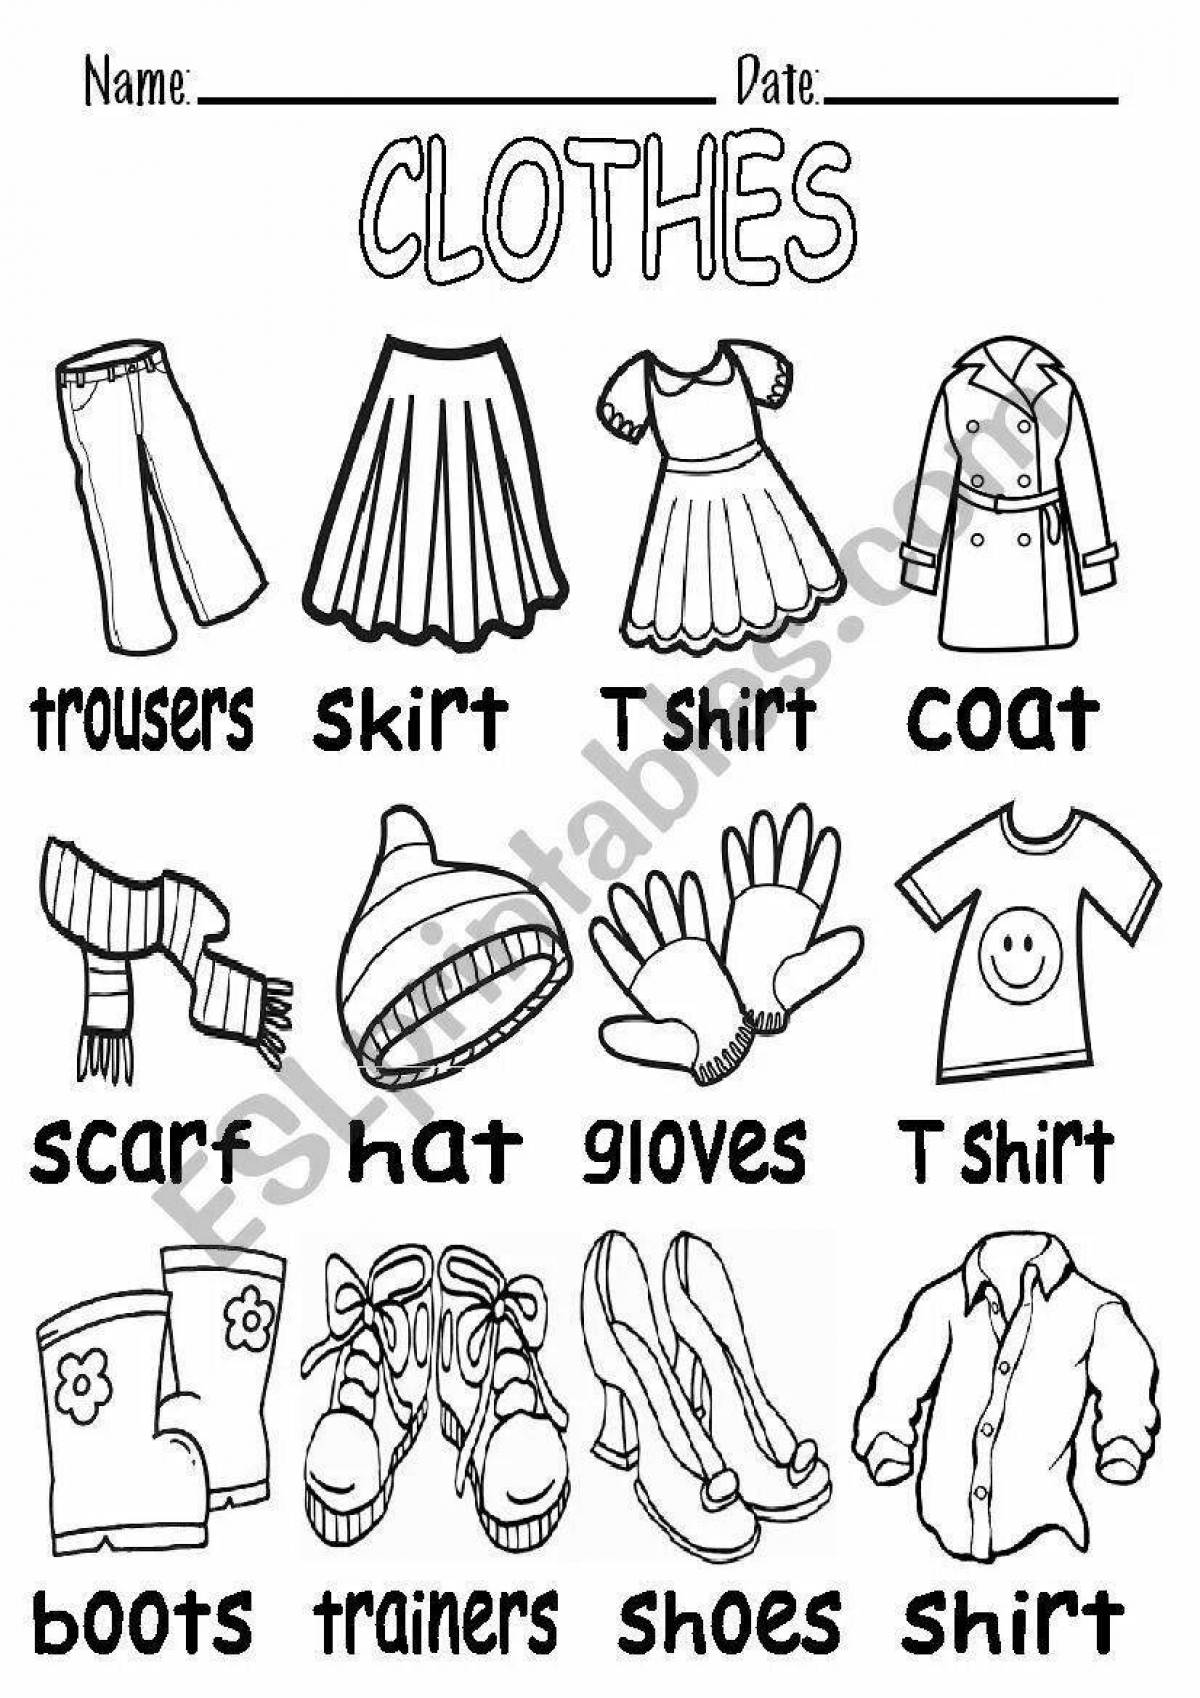 In English kids clothes #15